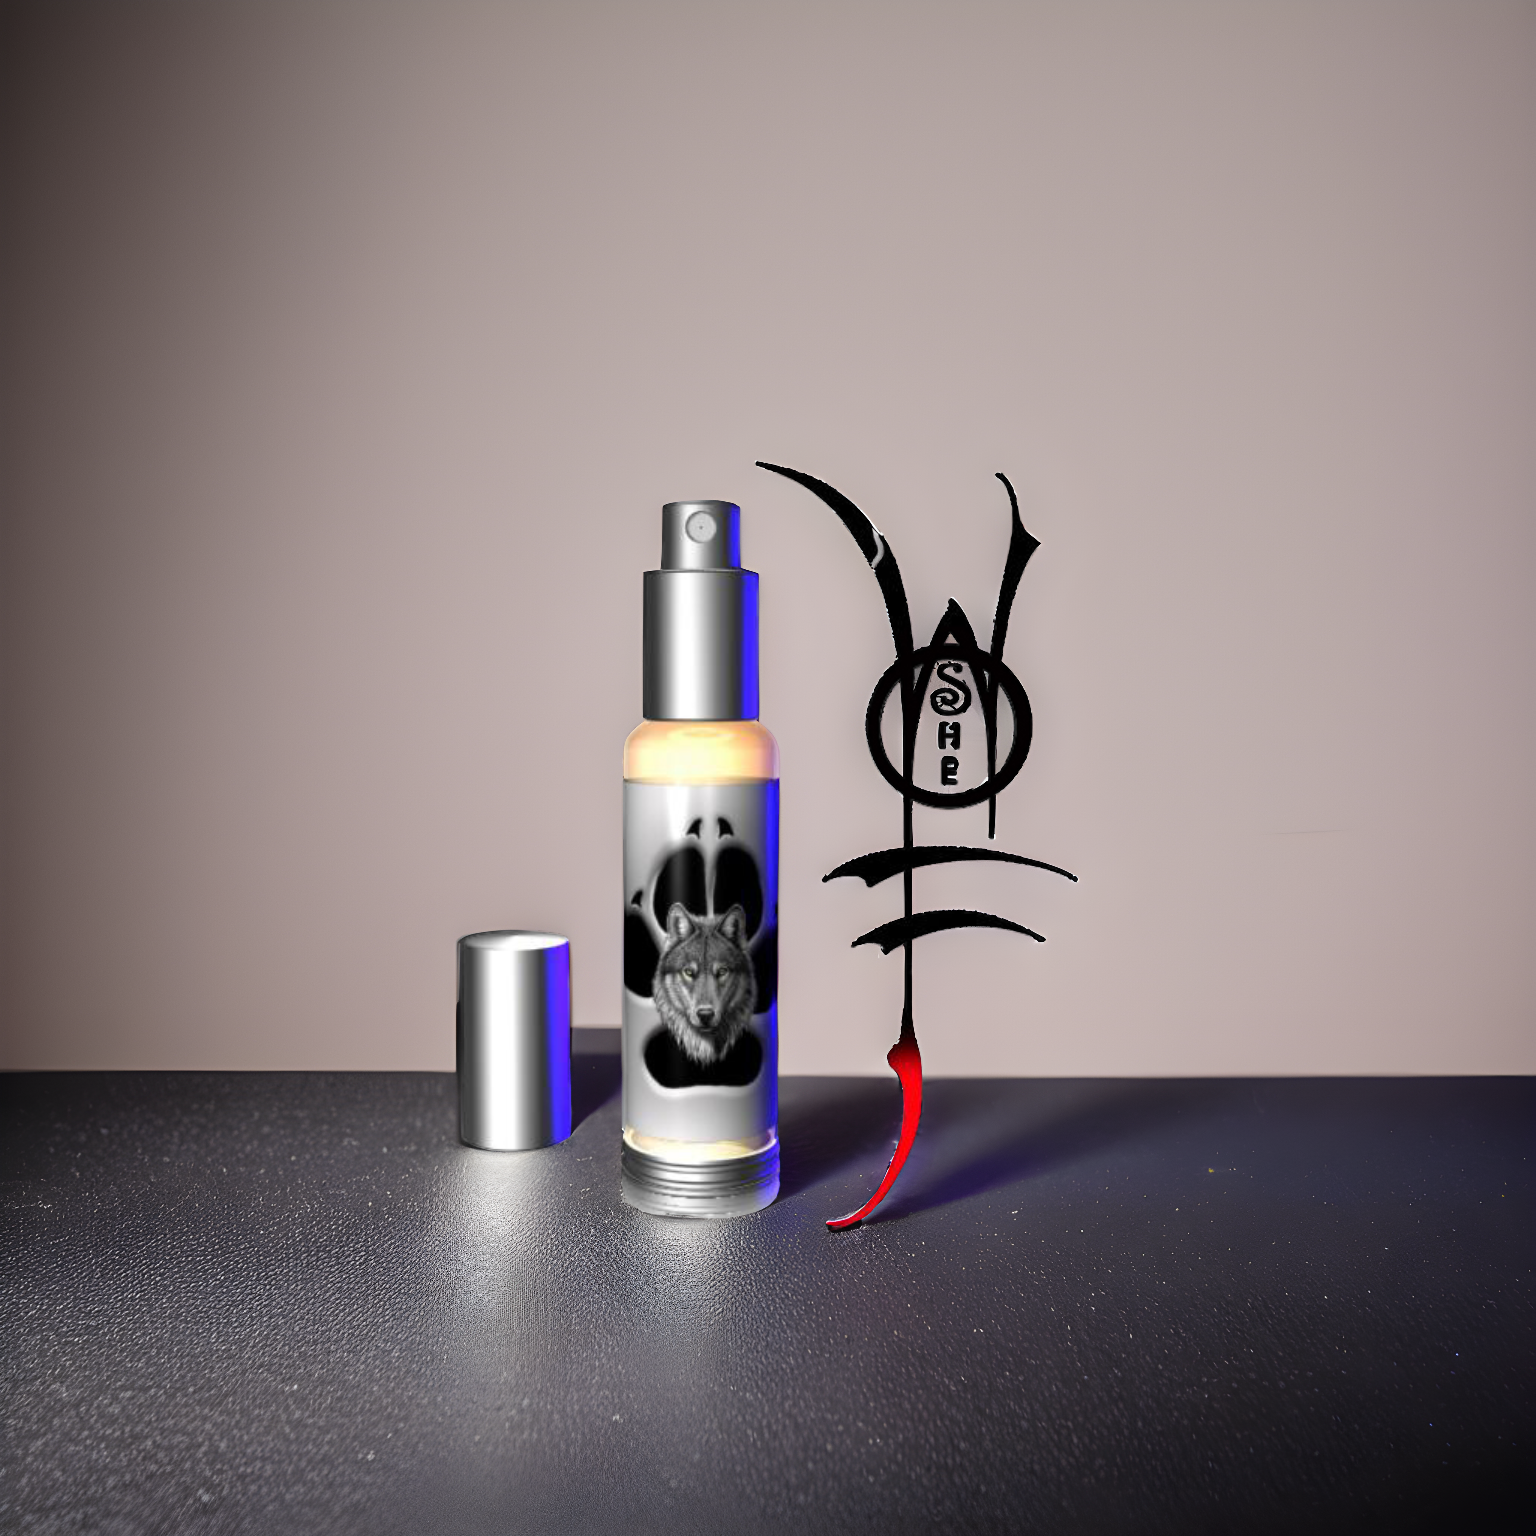 SHE WOLF™ Pheromone Perfume for Women by Royal Pheromones - Scented with peach, apricot, melon, apple, jasmine, and rose, in a sleek bottle featuring a wolf design.